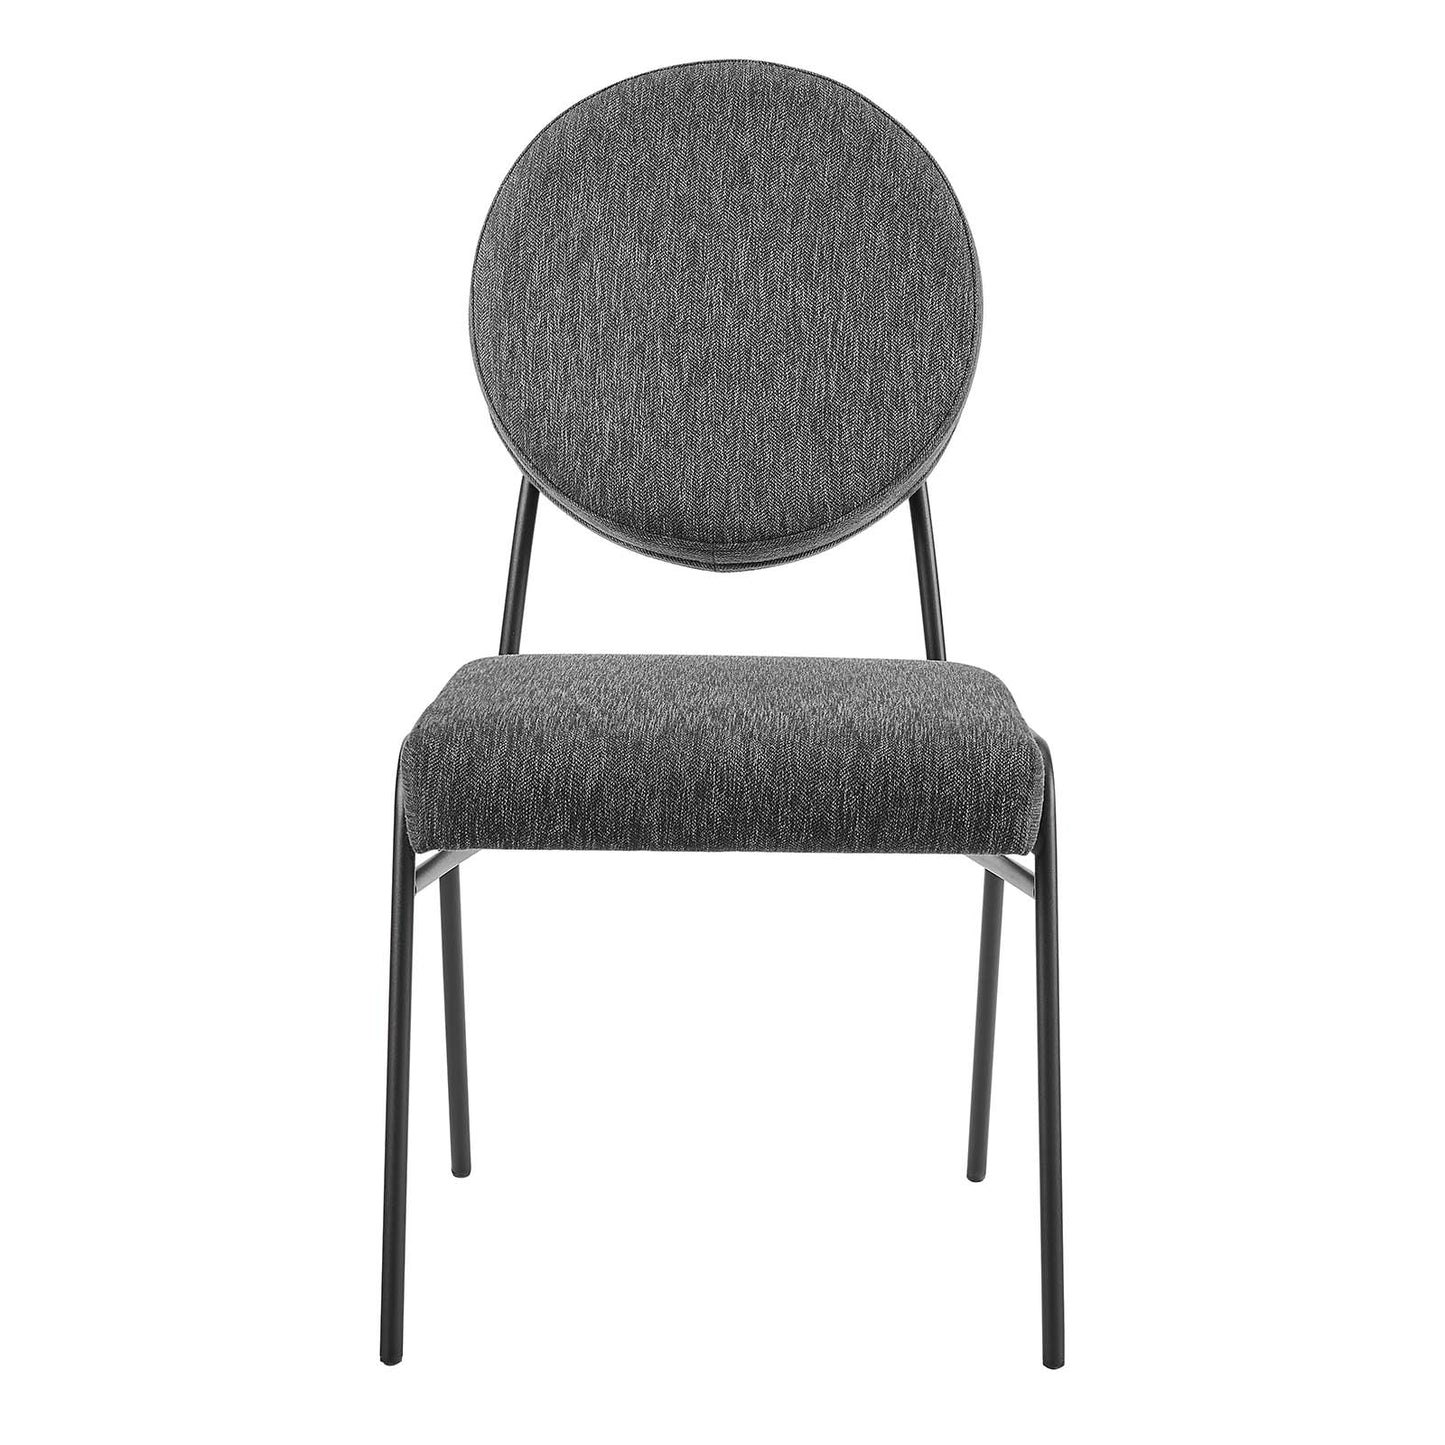 Craft Upholstered Fabric Dining Side Chairs - Set of 2 Black Charcoal EEI-6582-BLK-CHA